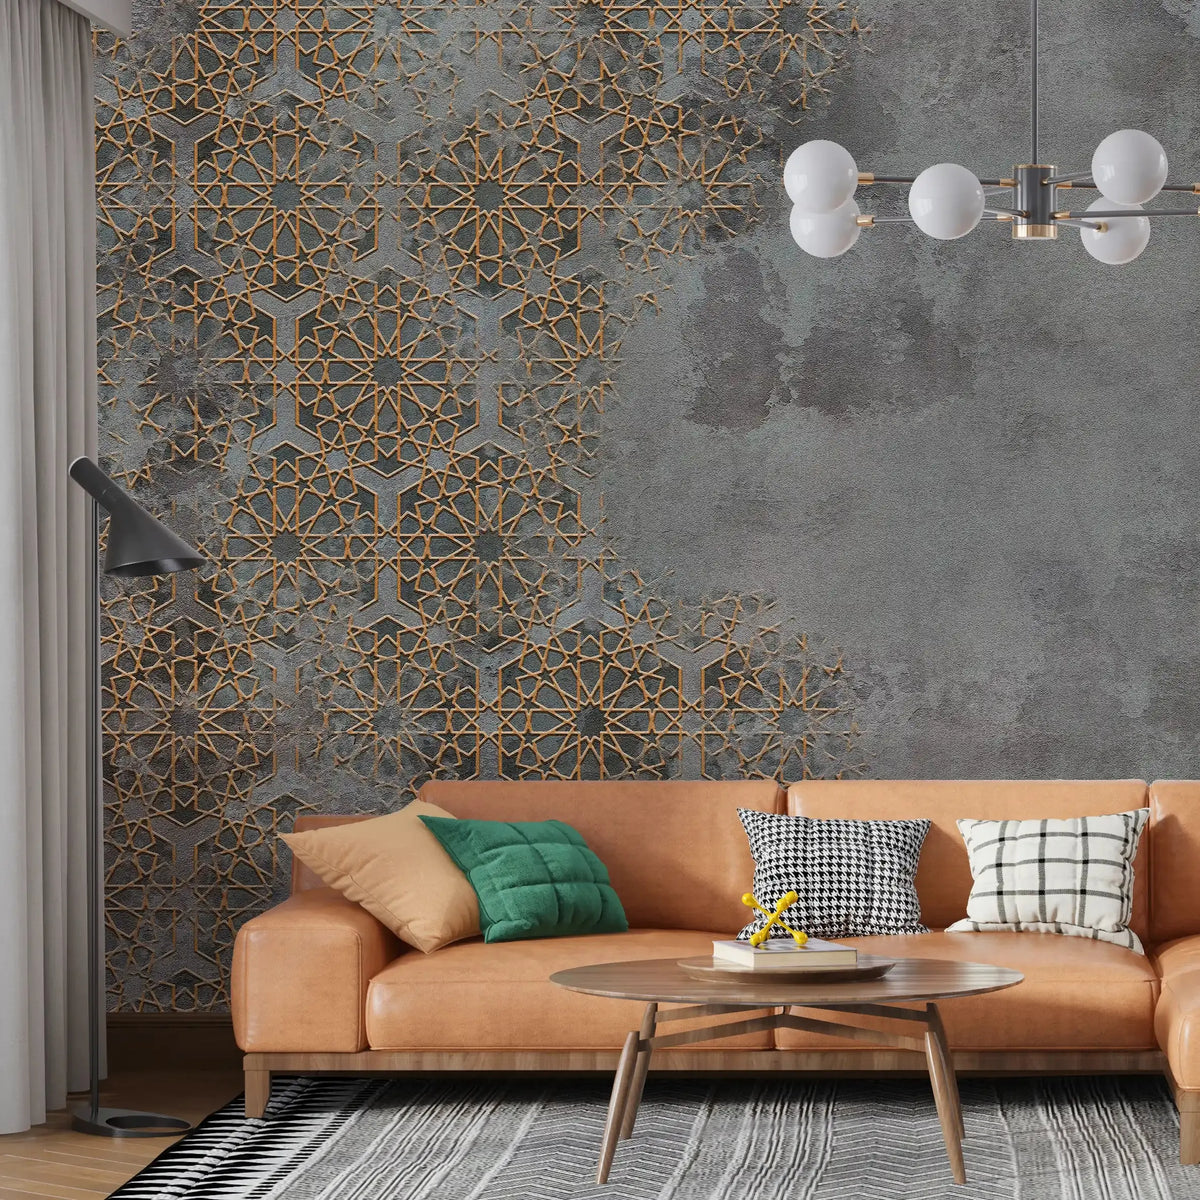 3068-A / Elegant Floral Abstract Peel and Stick Wallpaper with Gold Border - Perfect for Modern Room Deco - Artevella